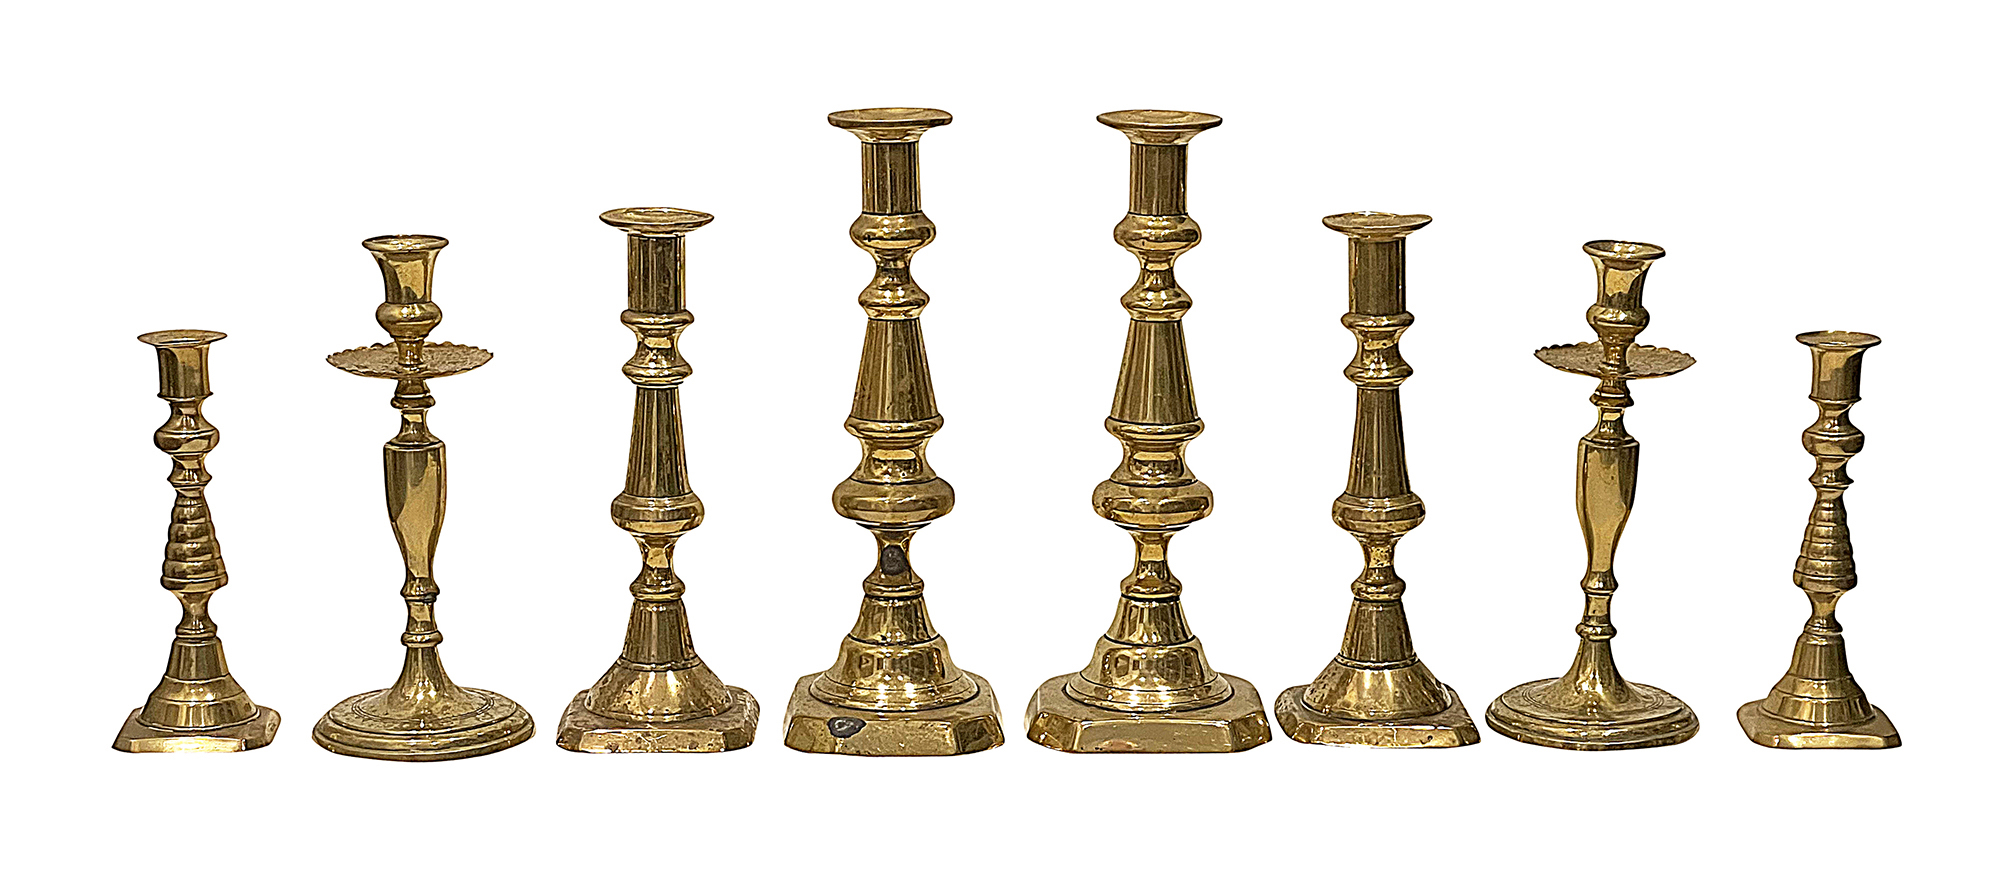 A pair of George II candlesticks and ten later 19th century pairs - Image 3 of 3